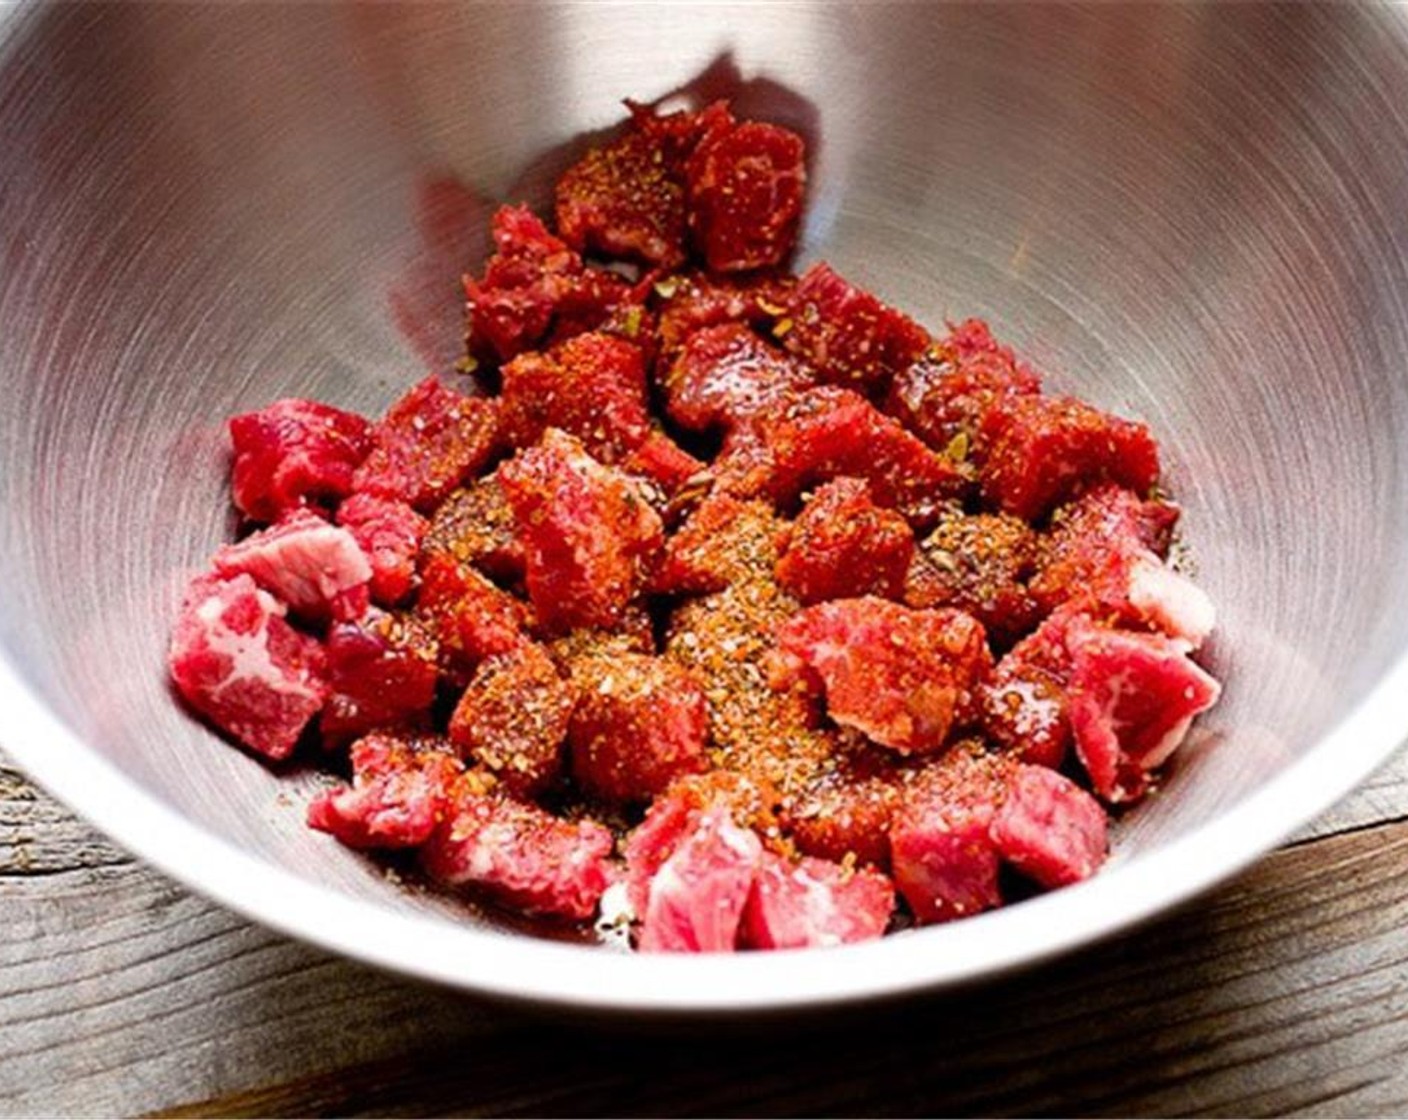 step 1 In a bowl, combine Steak (8 oz) and All-Purpose Spice Rub (1 Tbsp). Rub the spices into the steak.